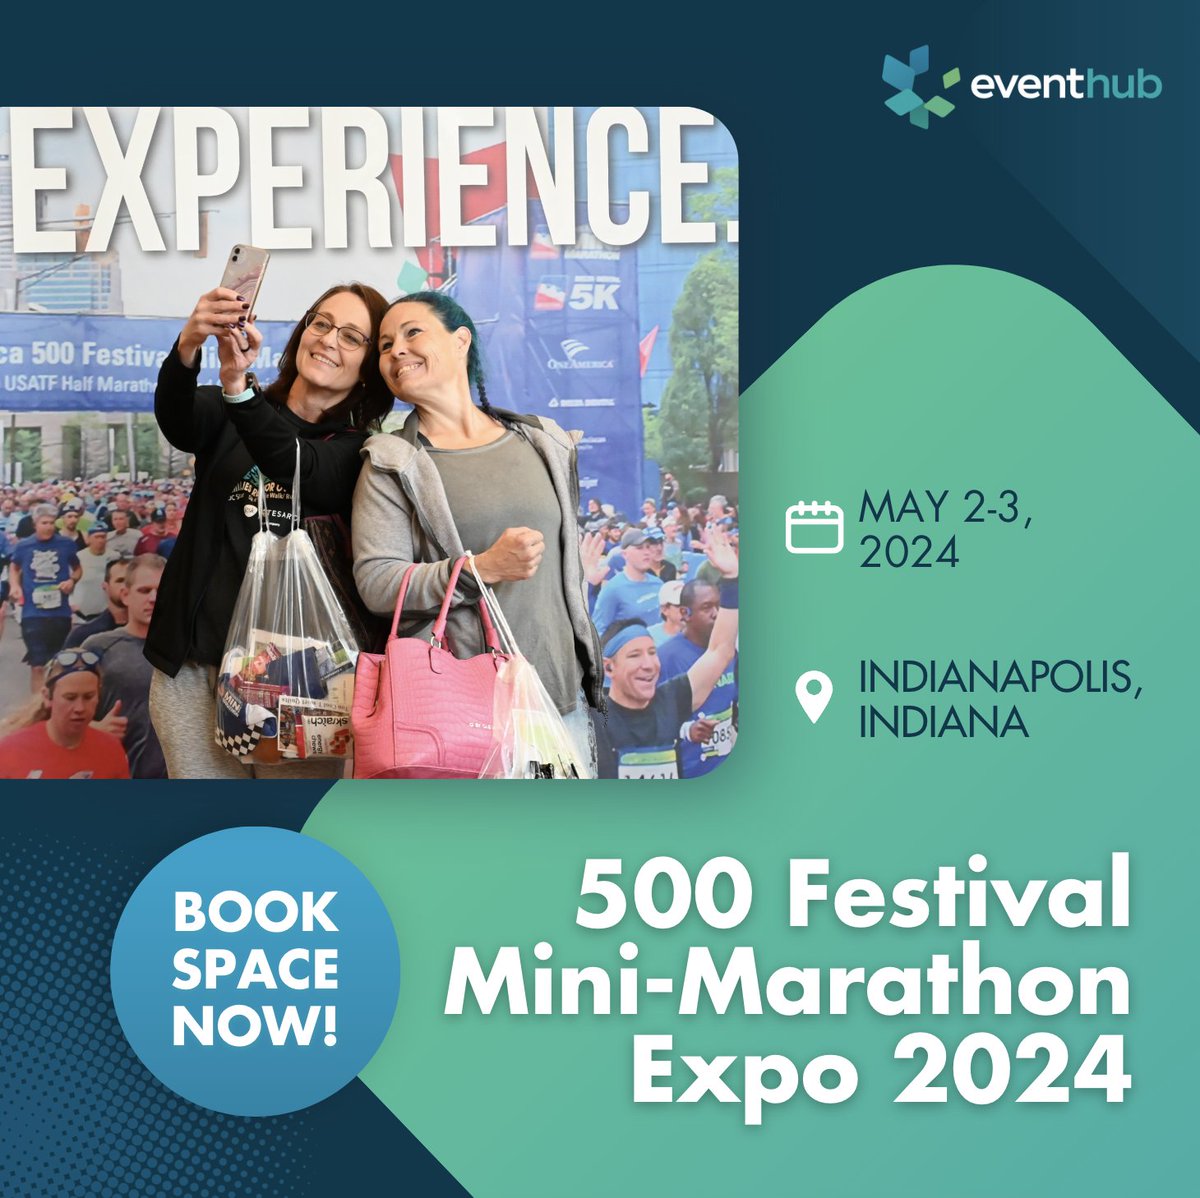 Drawing a crowd of over 35,000, the @500Festival Mini-Marathon Expo features exhibitors offering specialty merchandise, the latest footwear, apparel, nutrition, technology, and much more. Vendor and Sponsorship Opportunities now available! eventhub.net/events/500-Fes…